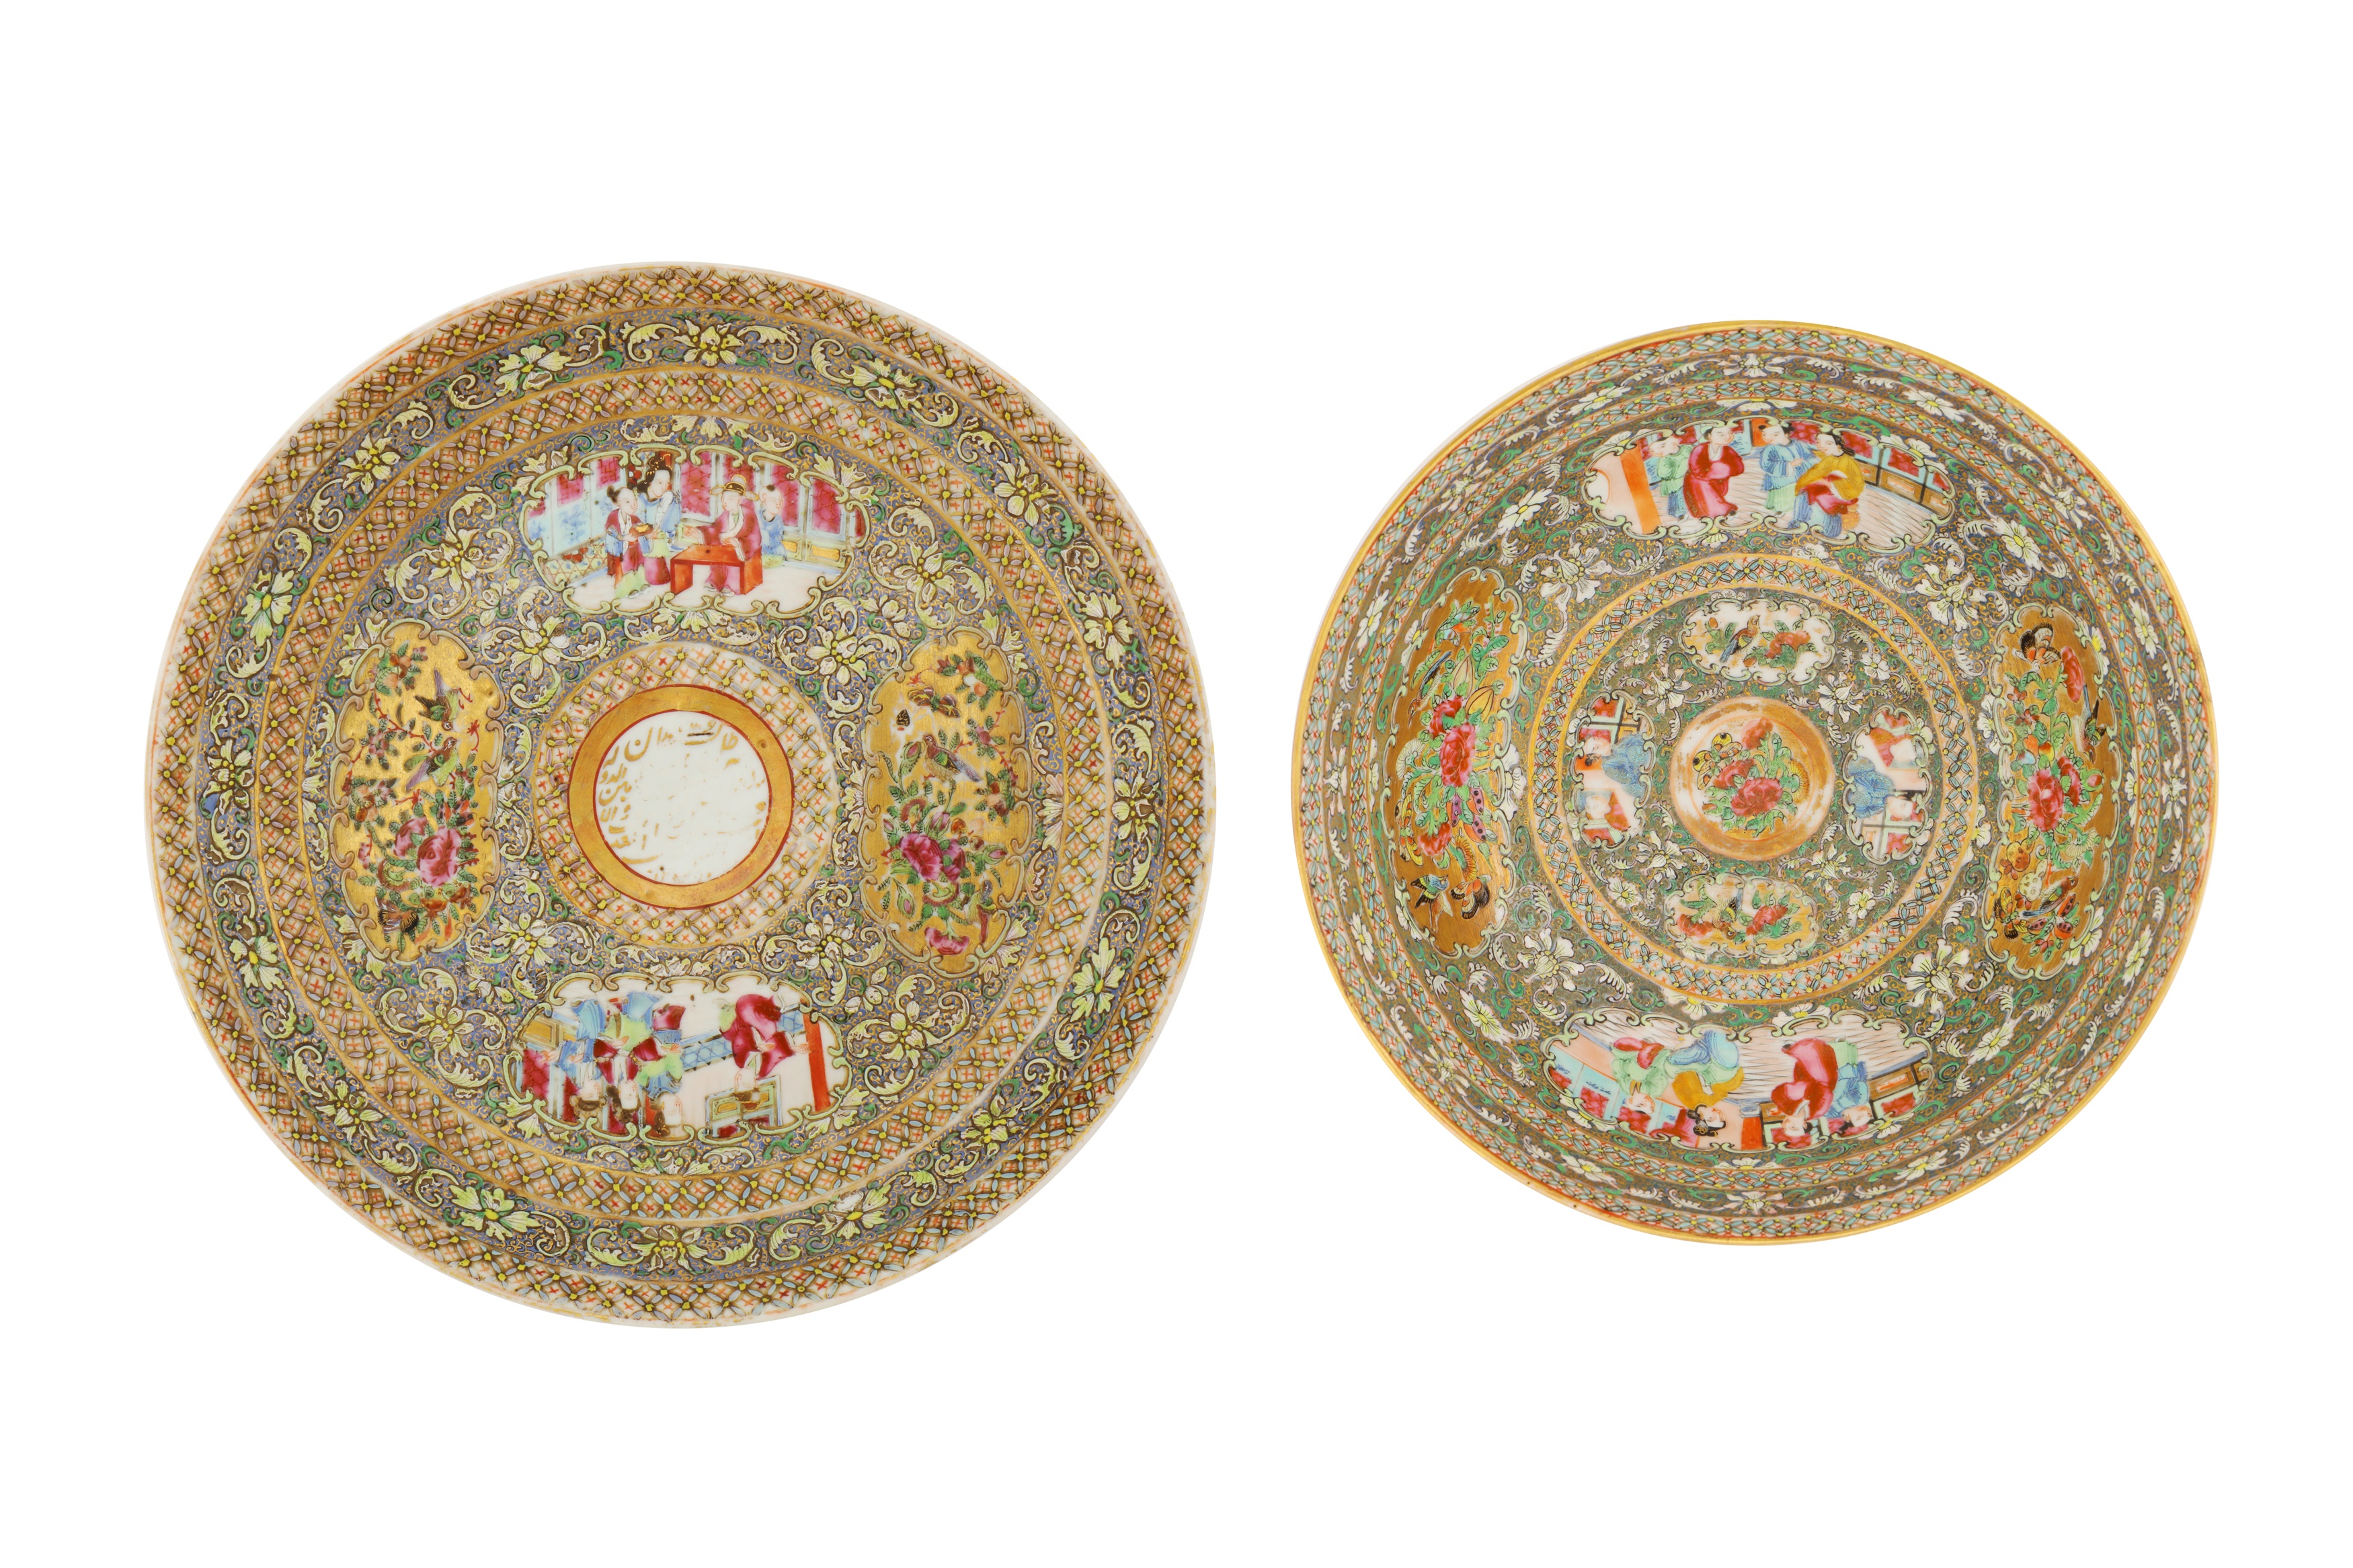 A MEDIUM SIZED BOWL AND DISH FROM THE ZILL AL-SULTAN CANTON PORCELAIN SERVICE